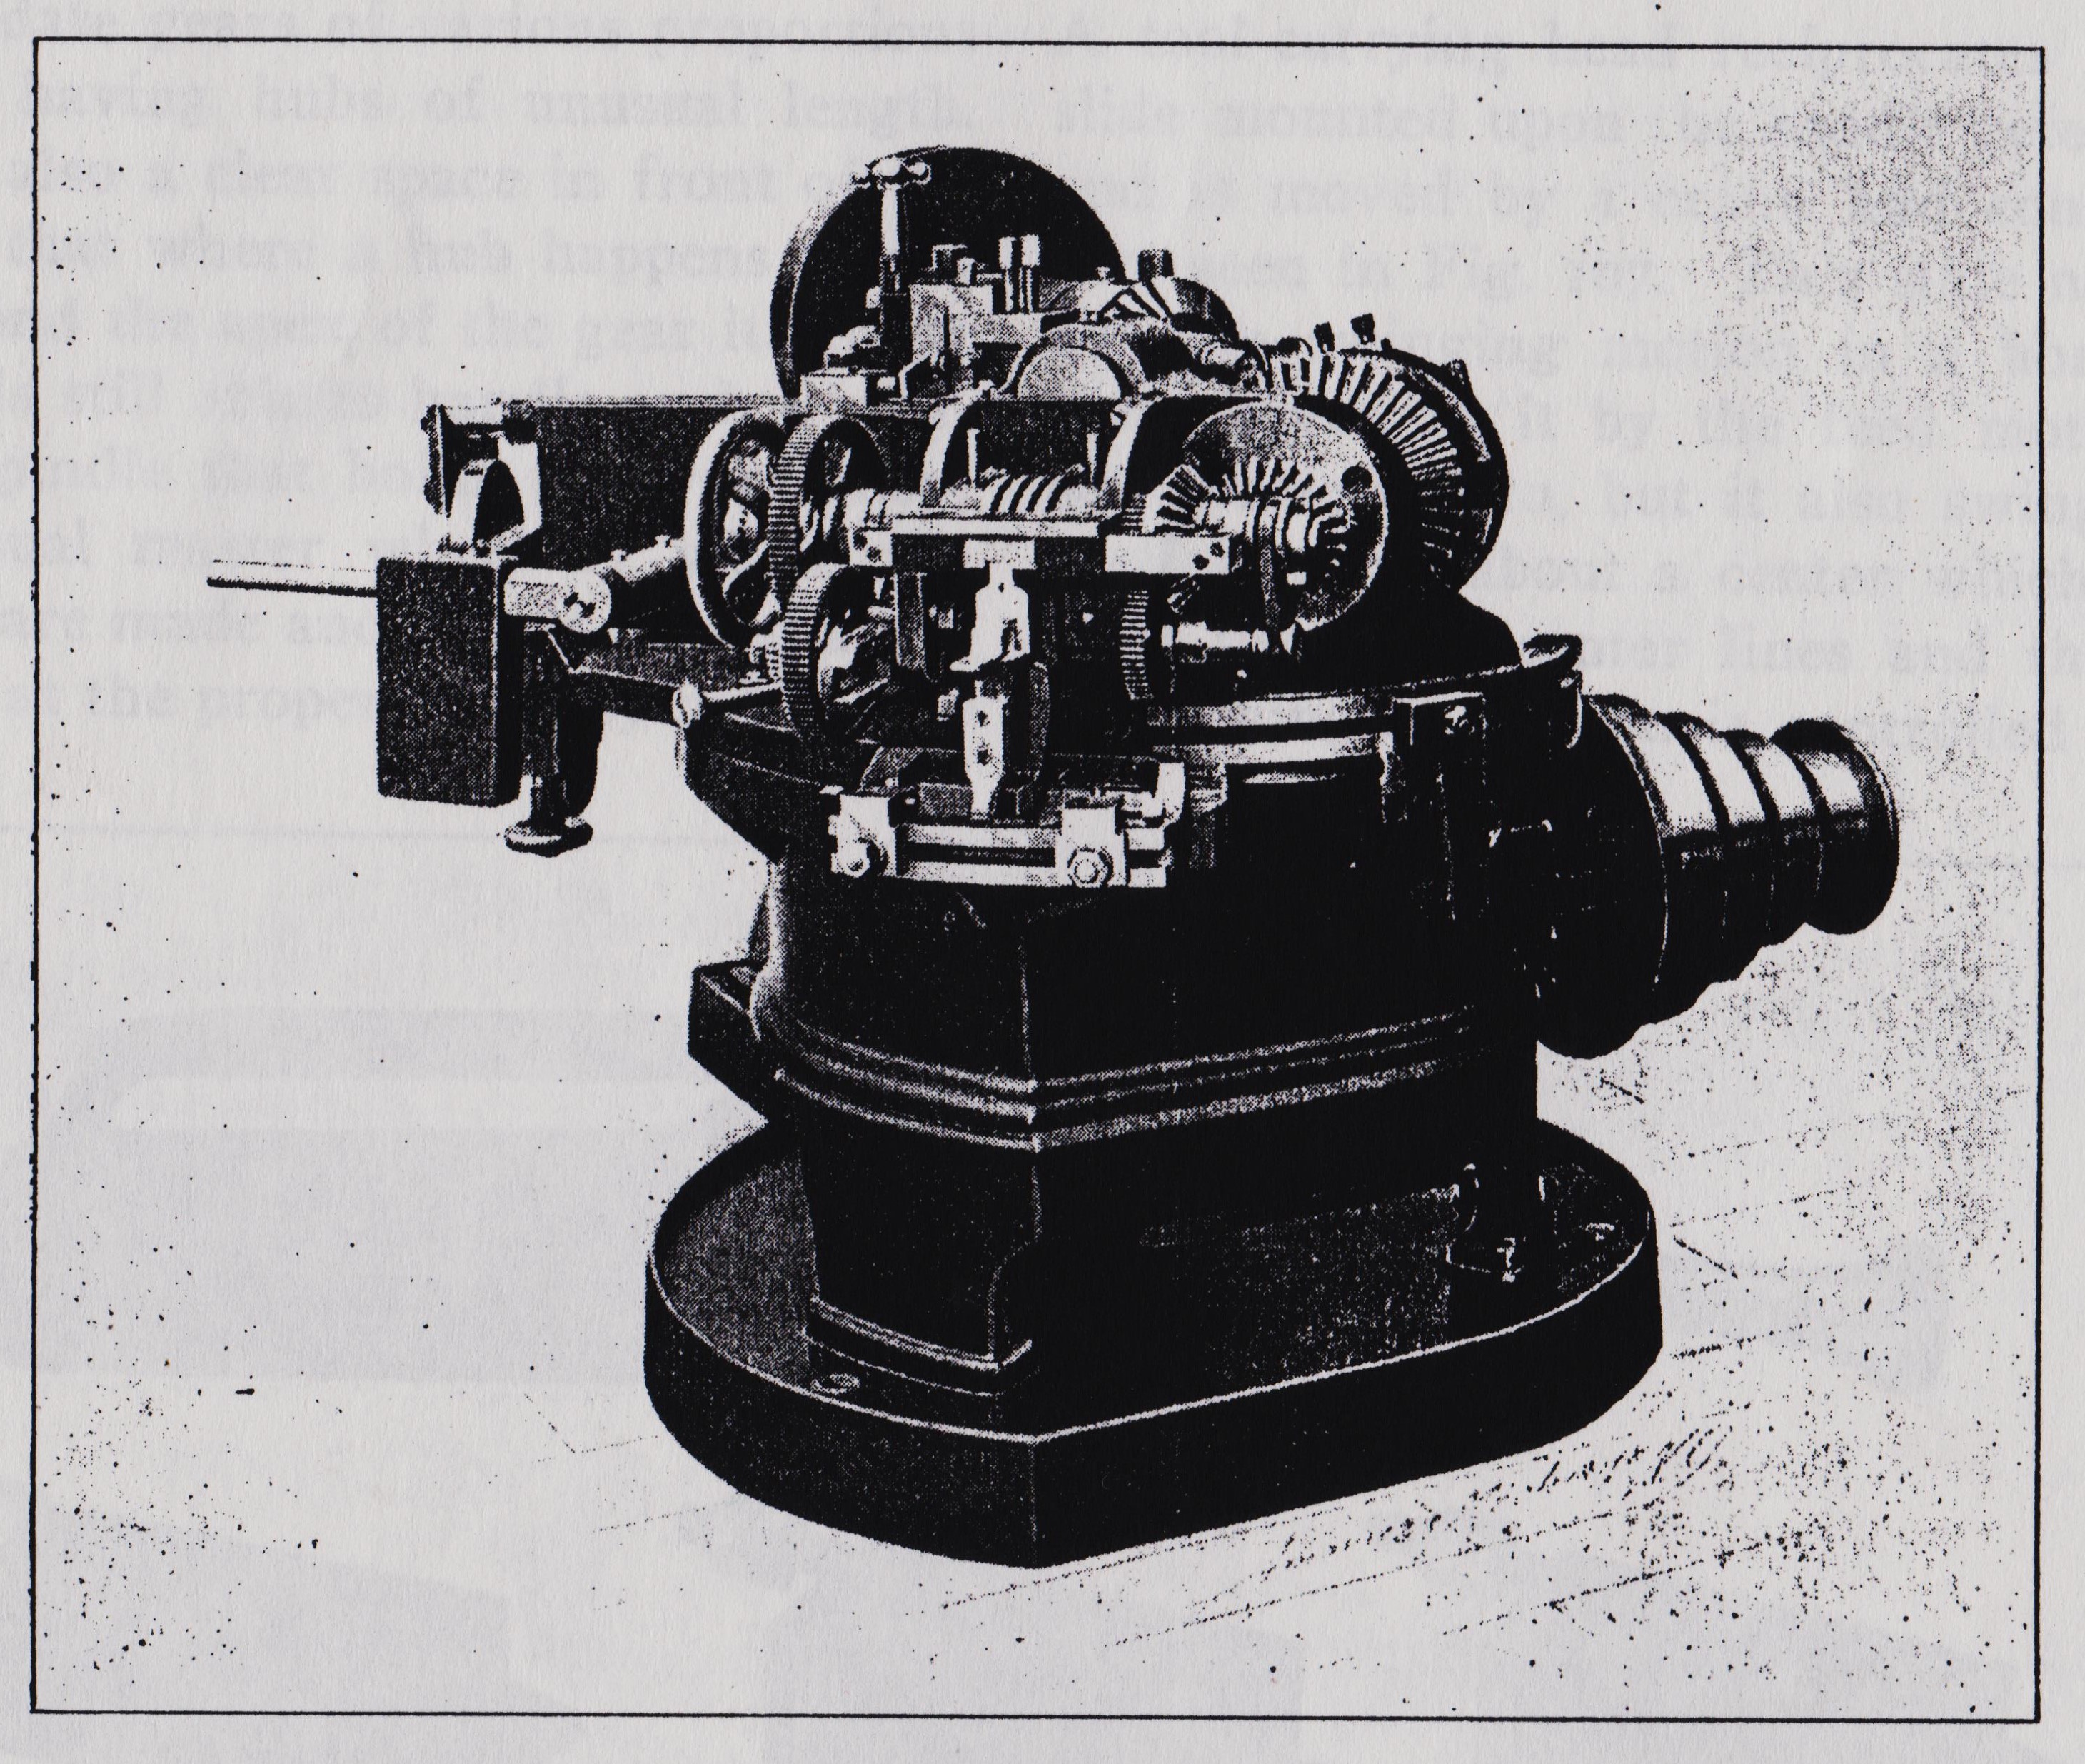 https://antiquemachinery.com/images-American-Machinist-Nov-8-1900-bot-The-Gleason-Bevel-Gear-Toot-Planer/-Gear-Planing-Tool-and-the-Gleason-Gear-Planing-Machine-American-Machinist-Nov-8-1900.jpeg